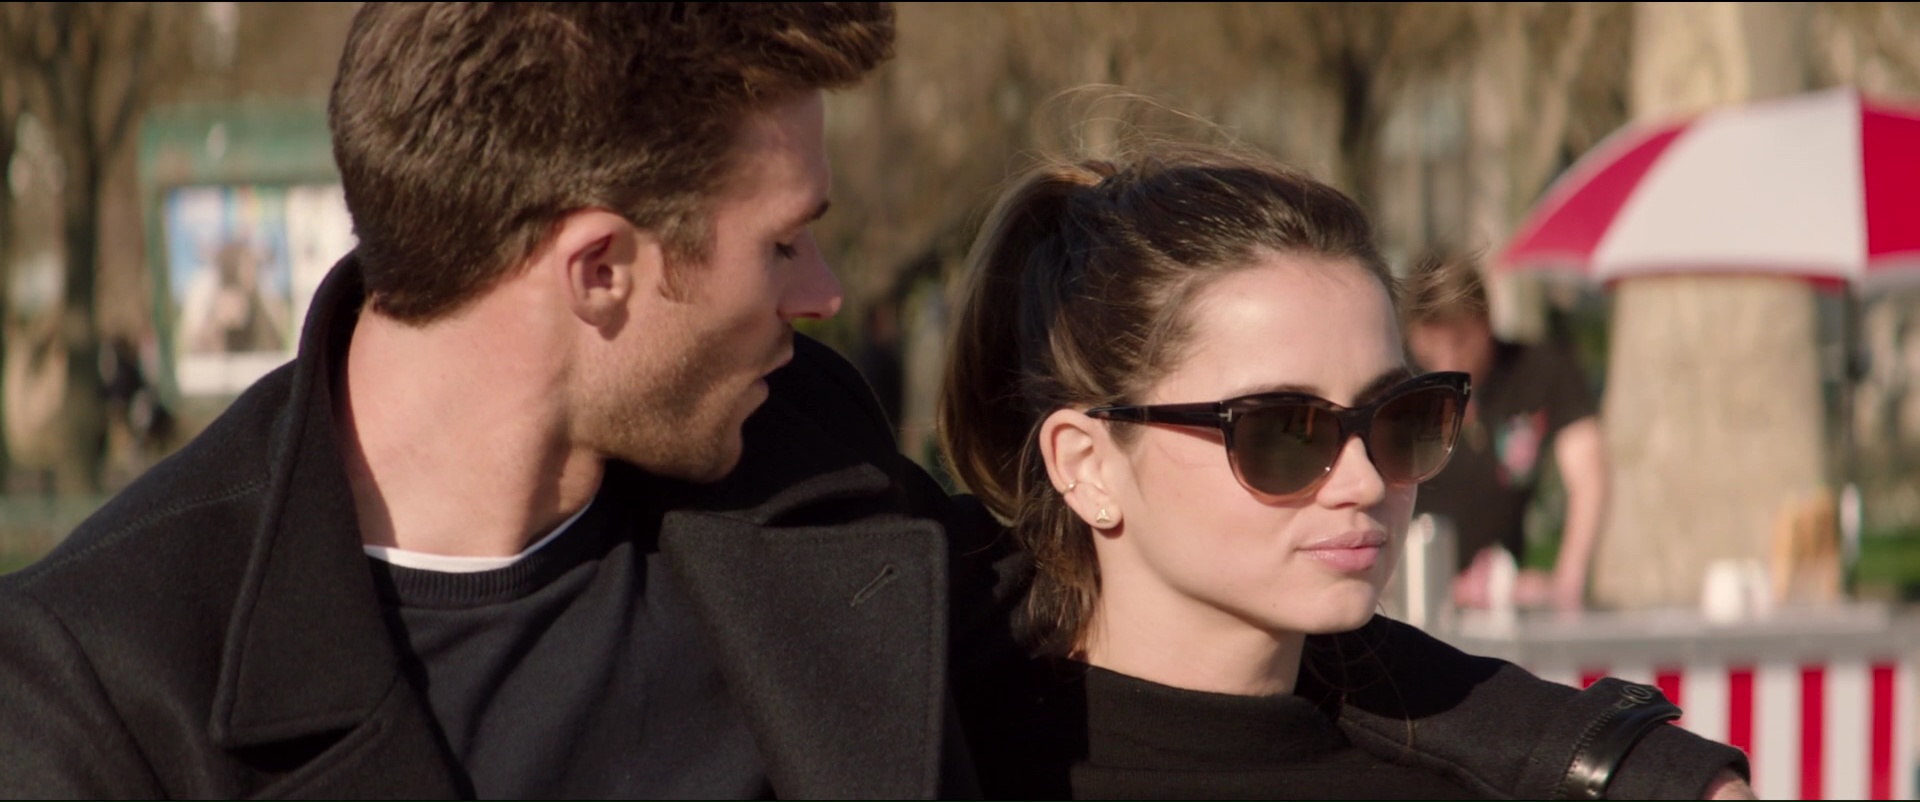 Tom Ford Sunglasses Worn by Ana de Armas in Overdrive (2017) Movie